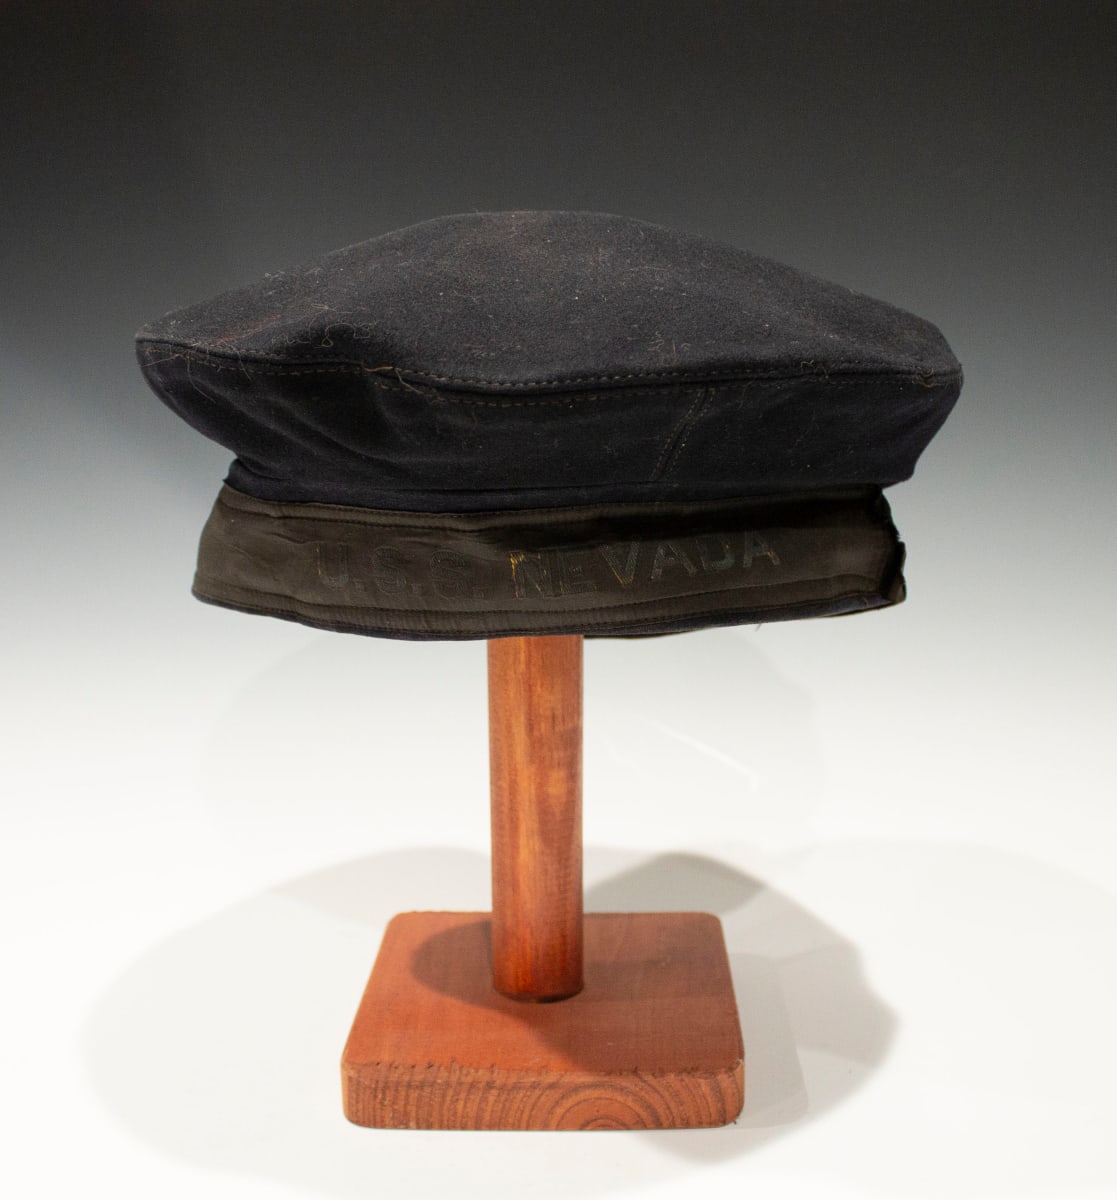 Sailor's Cap by Unknown, United States 